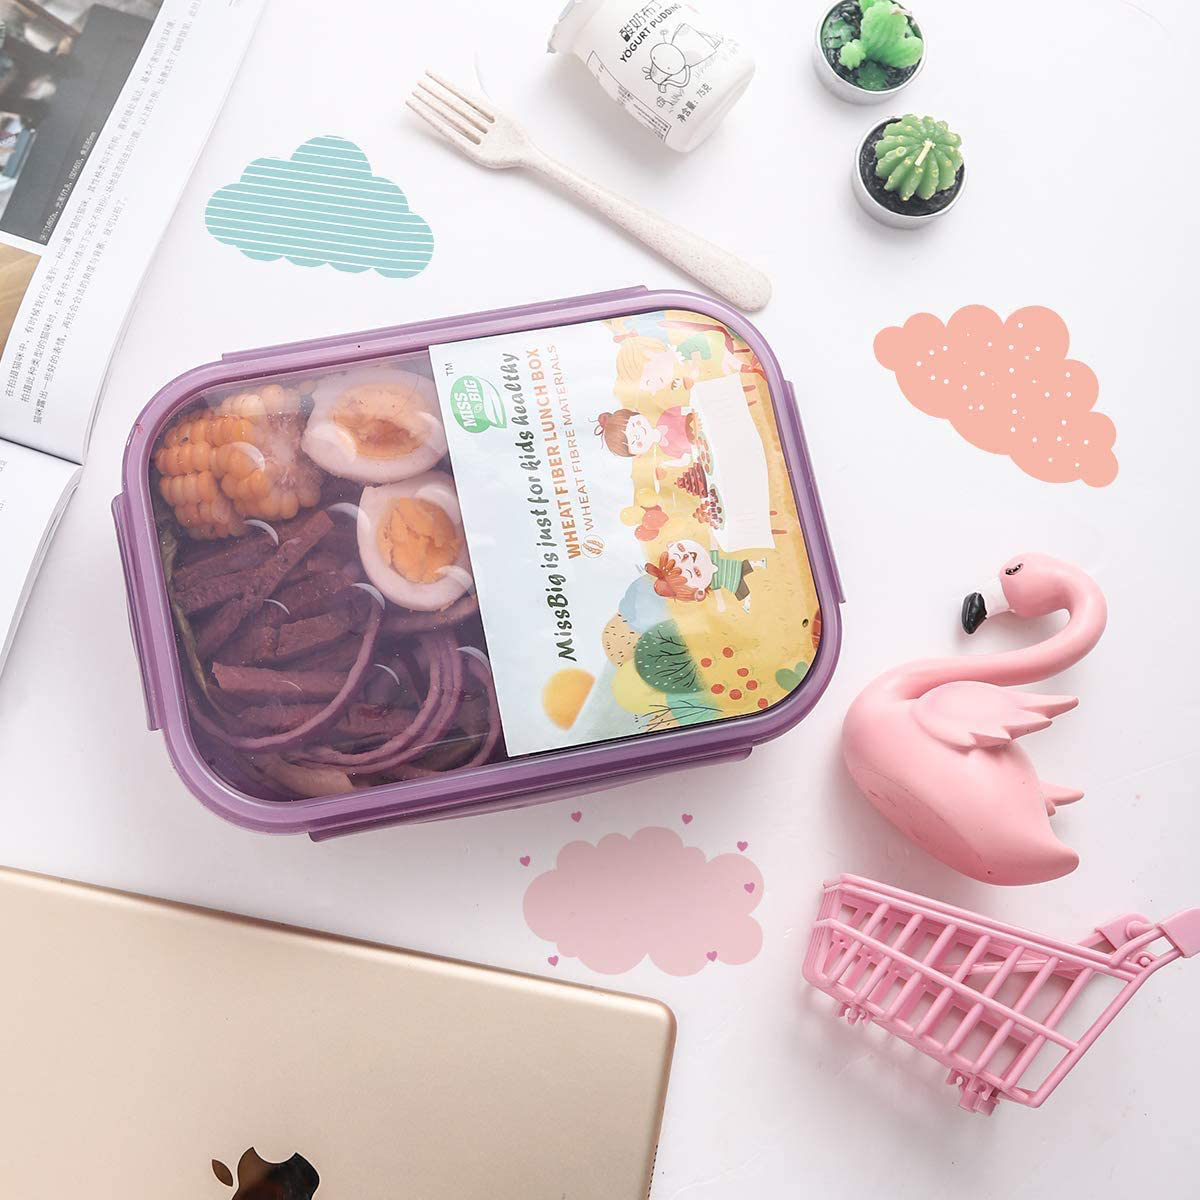 MISS BIG Lunch Boxes,MissBig Ideal Bento Lunch Box,Leak Proof